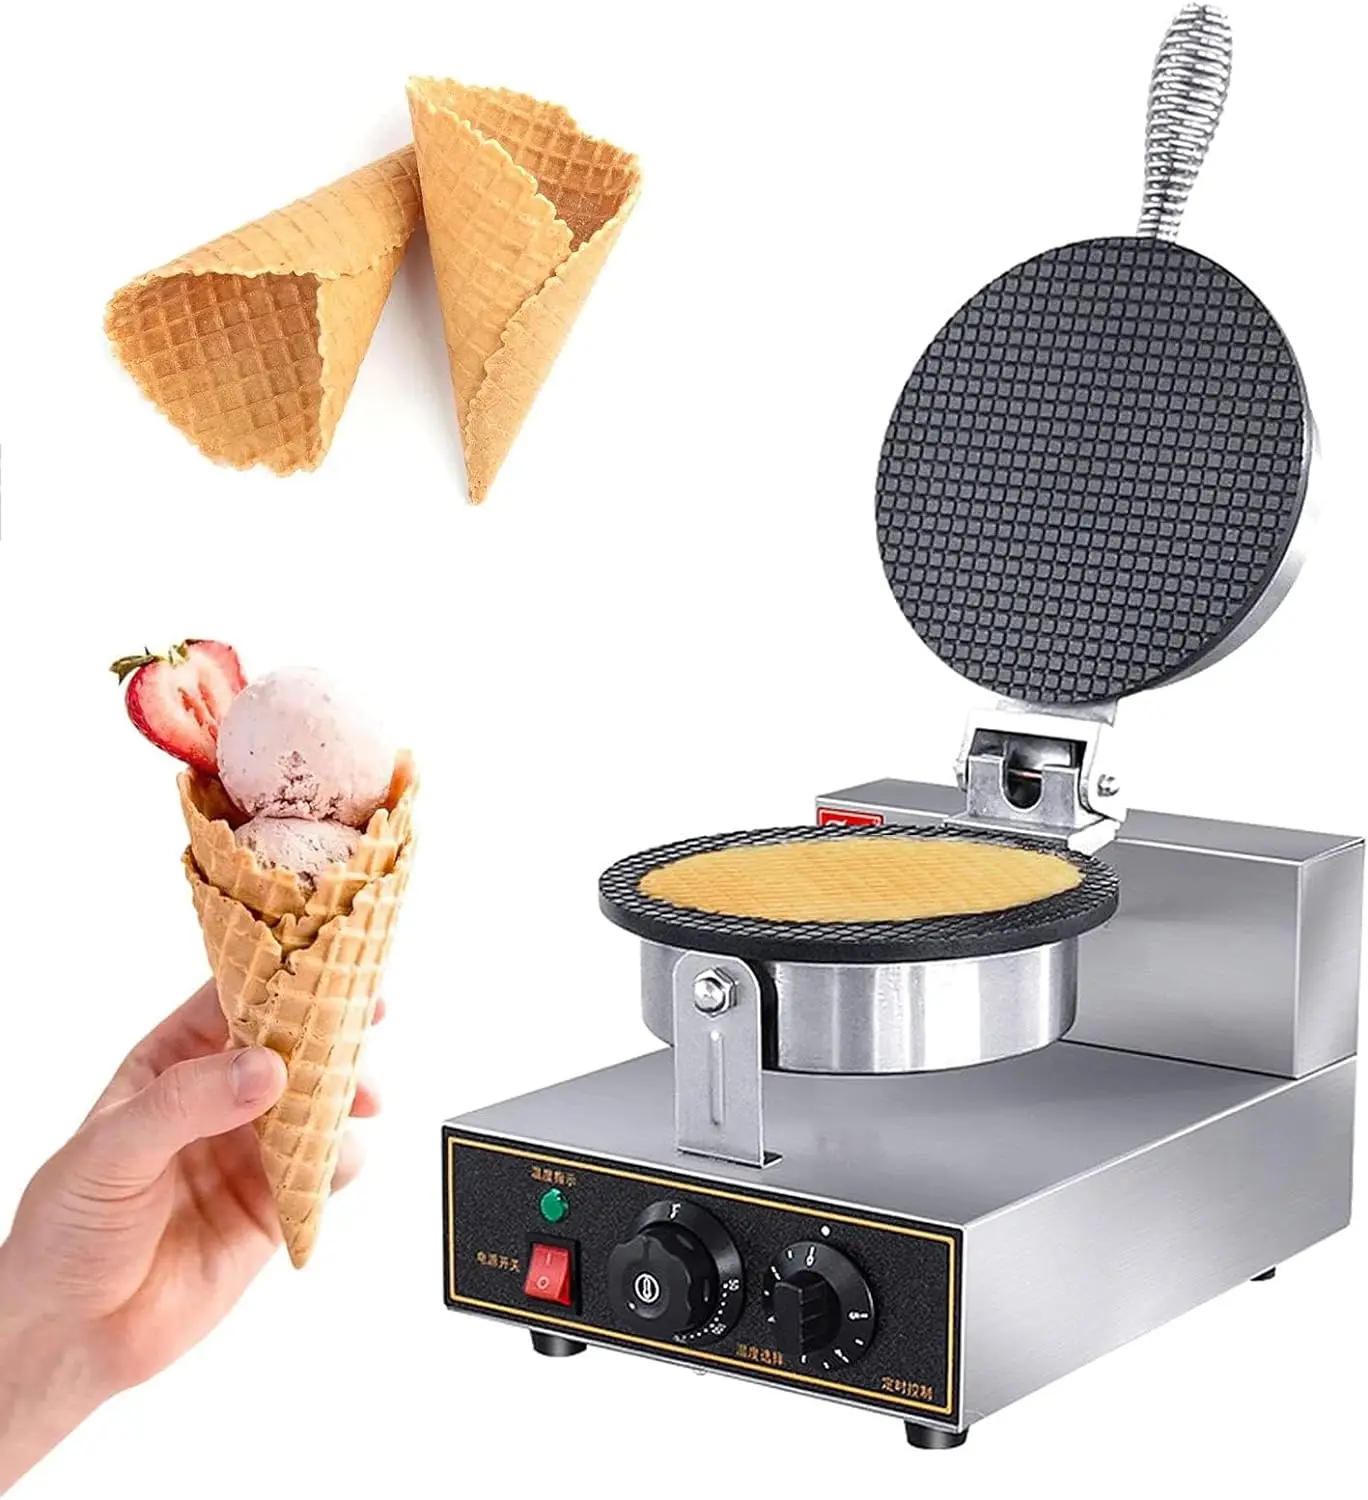 

Cream Cone Waffle Maker Machine 1200W Stainless Steel Nonstick Surface for Commercial Home Use ( Ice Cream Cone Waffle Maker Mac